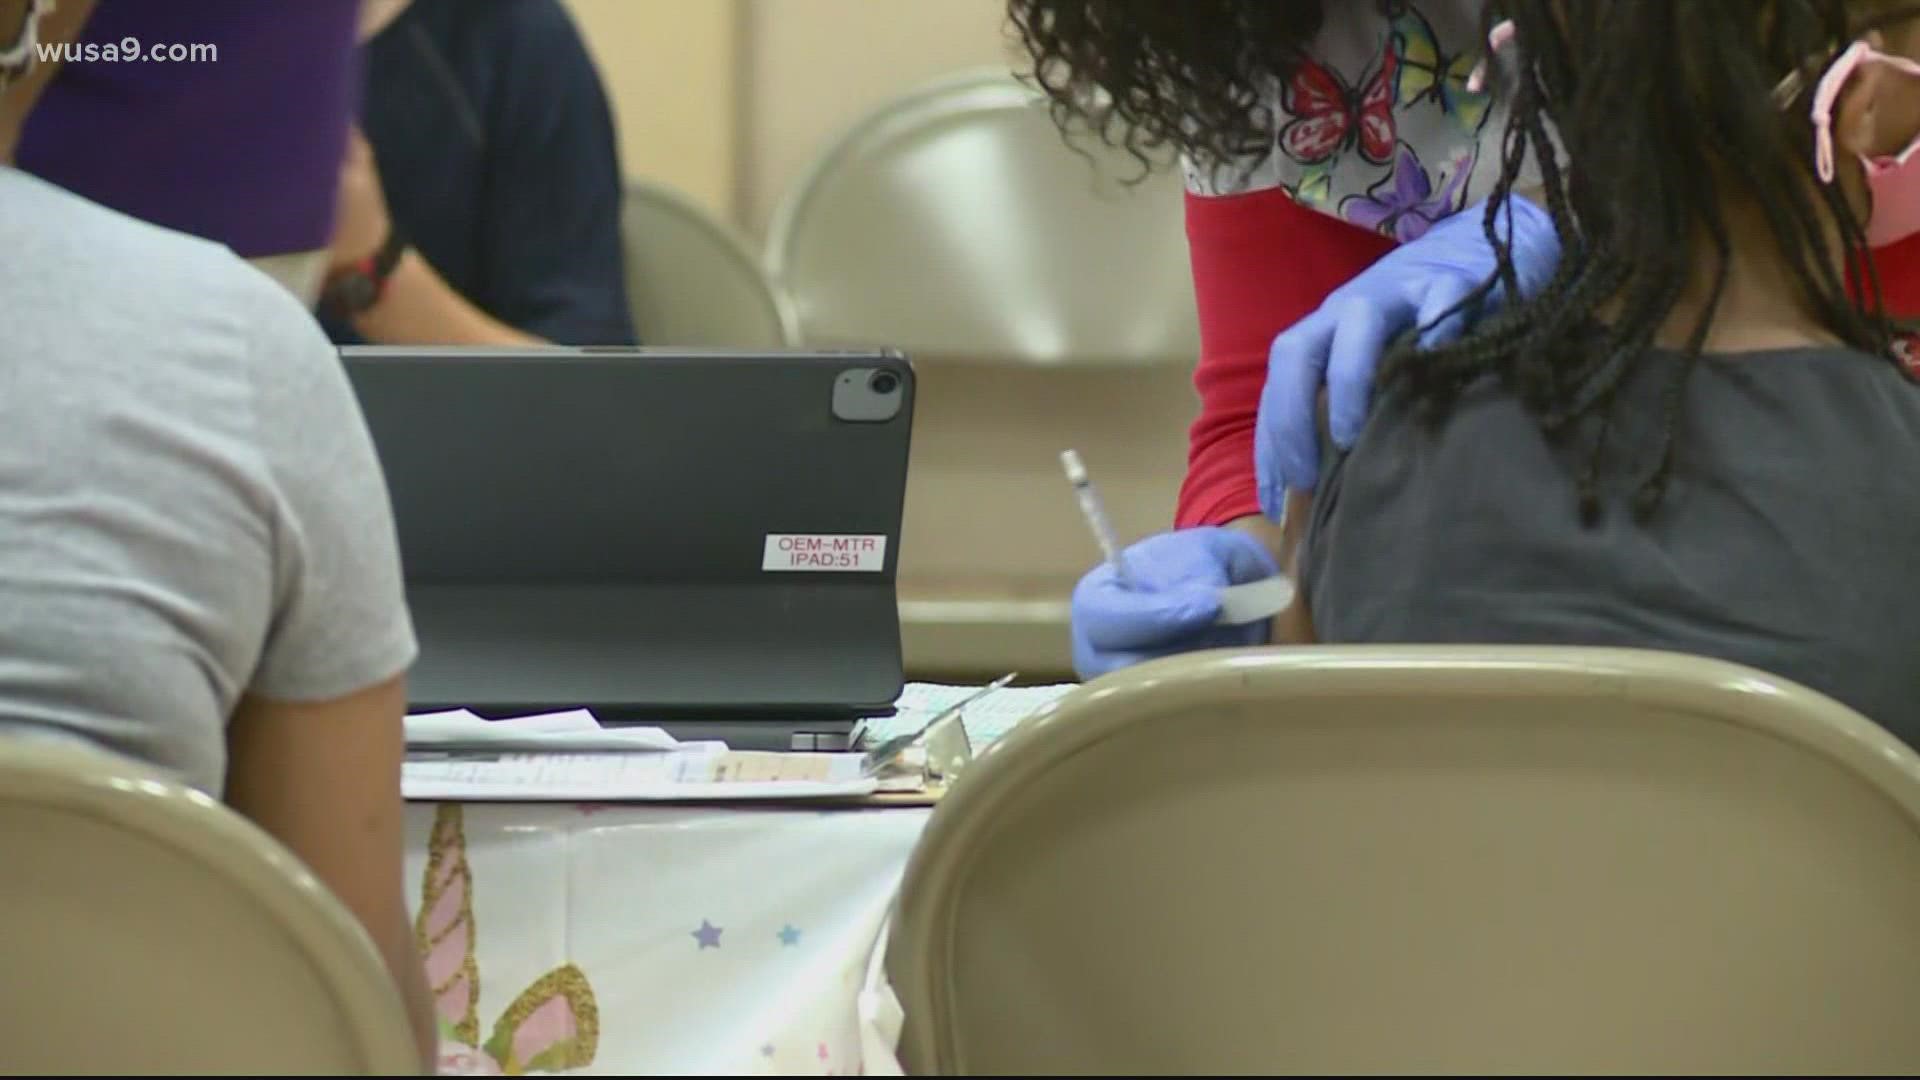 Prince George's County residents, including children ages 5 to 11, began to receive the COVID-19 vaccine at one of many mobile clinics planned through mid-December.